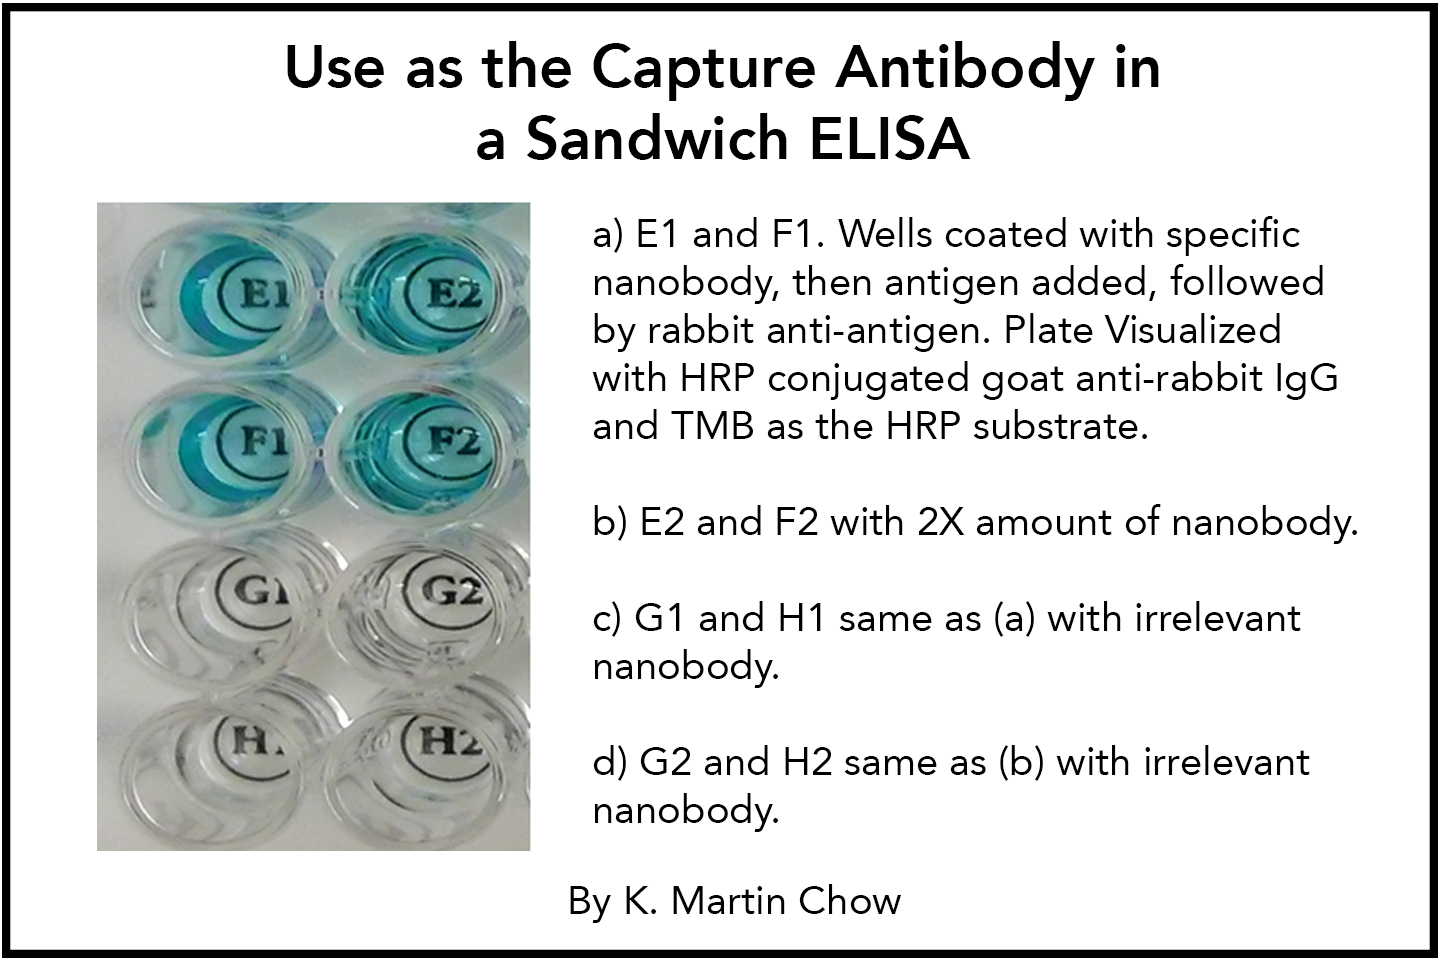 Use as the Capture Antibody in a Sandwich ELISA